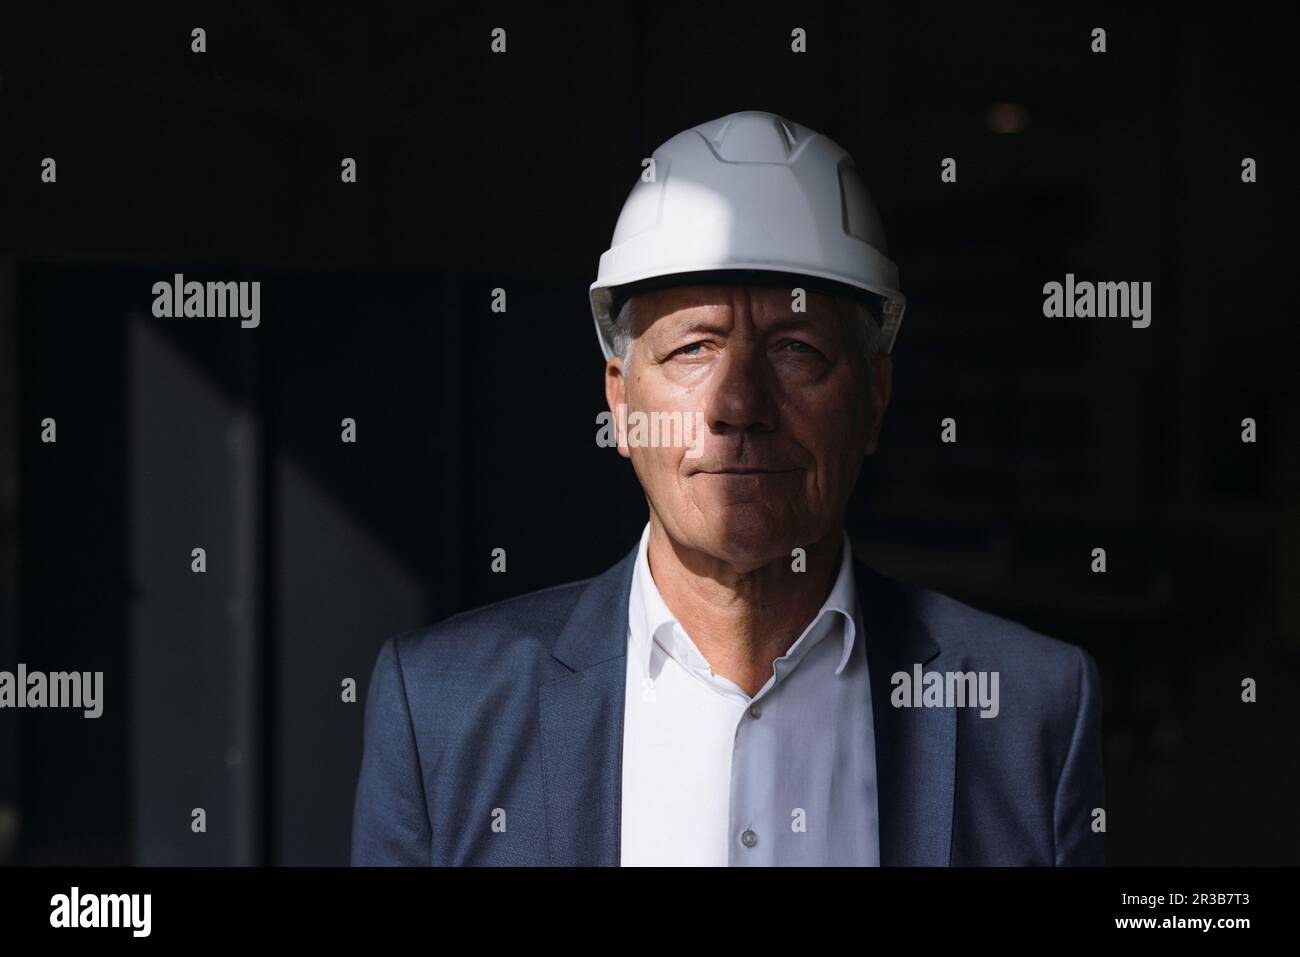 Businessman wearing blazer and hard hat in factory Stock Photo